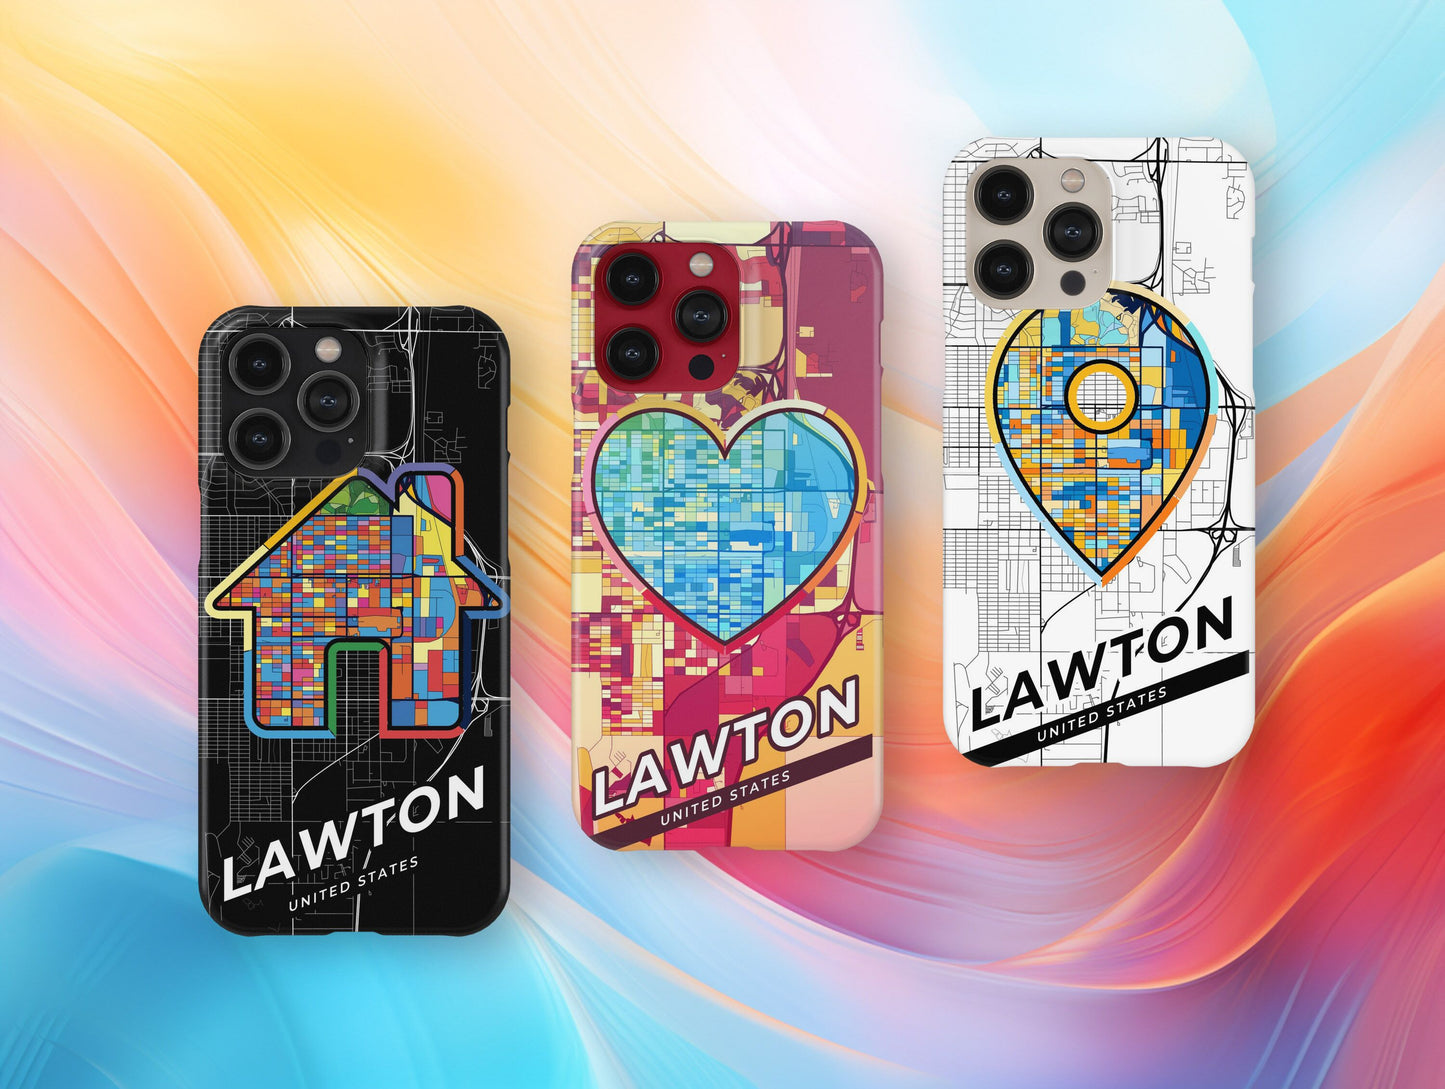 Lawton Oklahoma slim phone case with colorful icon. Birthday, wedding or housewarming gift. Couple match cases.